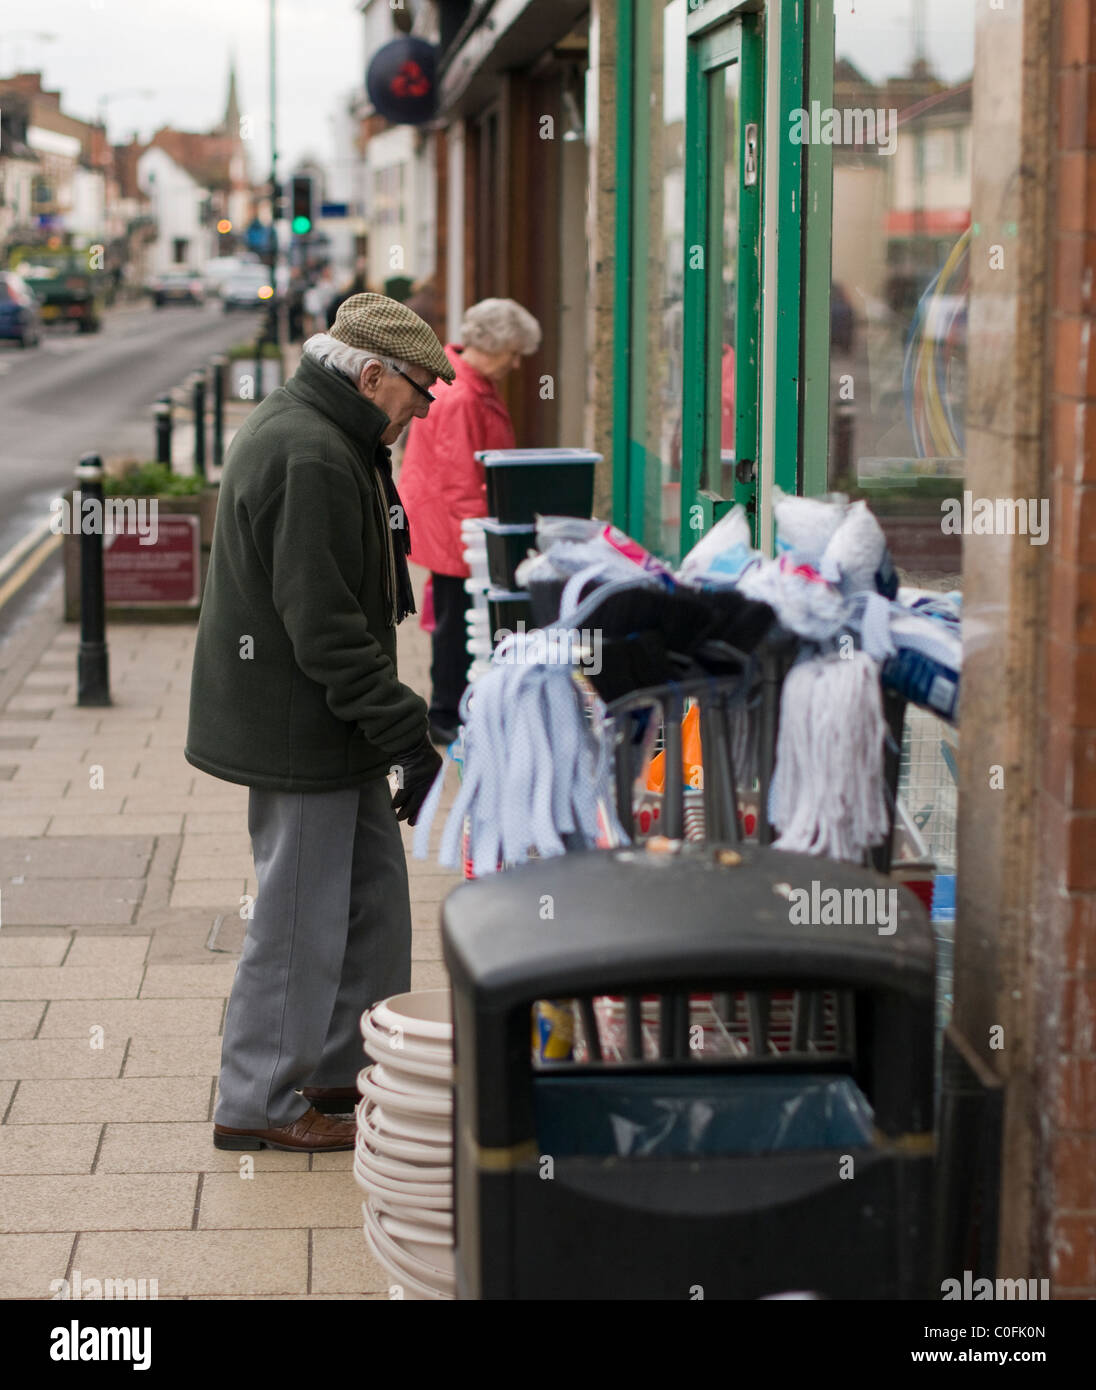 Elderly man shopping for household items in a 'pound shop' in Kenilworth, Warwickshire. Stock Photo